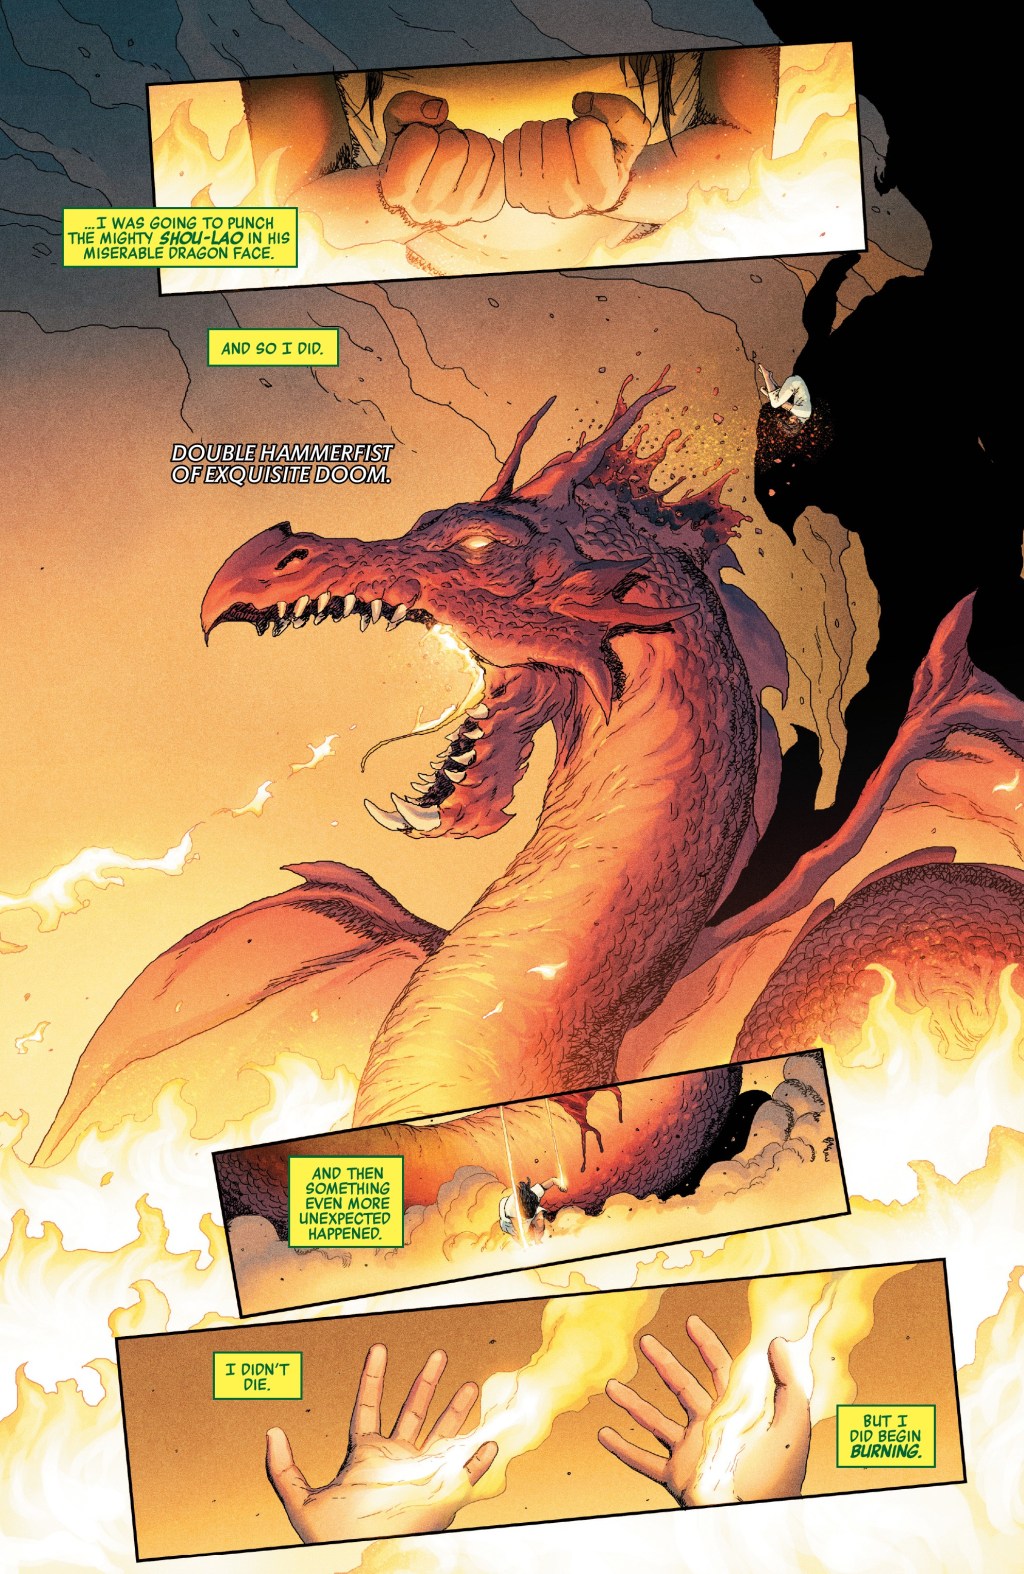 Fan Fei becomes the first Iron Fist in Avengers Vol. 8 #13 "The Girl Who Punched The Dragon" (2019), Marvel Comics. Words by Jason Aaron, art by Andrea Sorrentino, Justin Ponsor, Erick Arciniega, and Cory Petit.